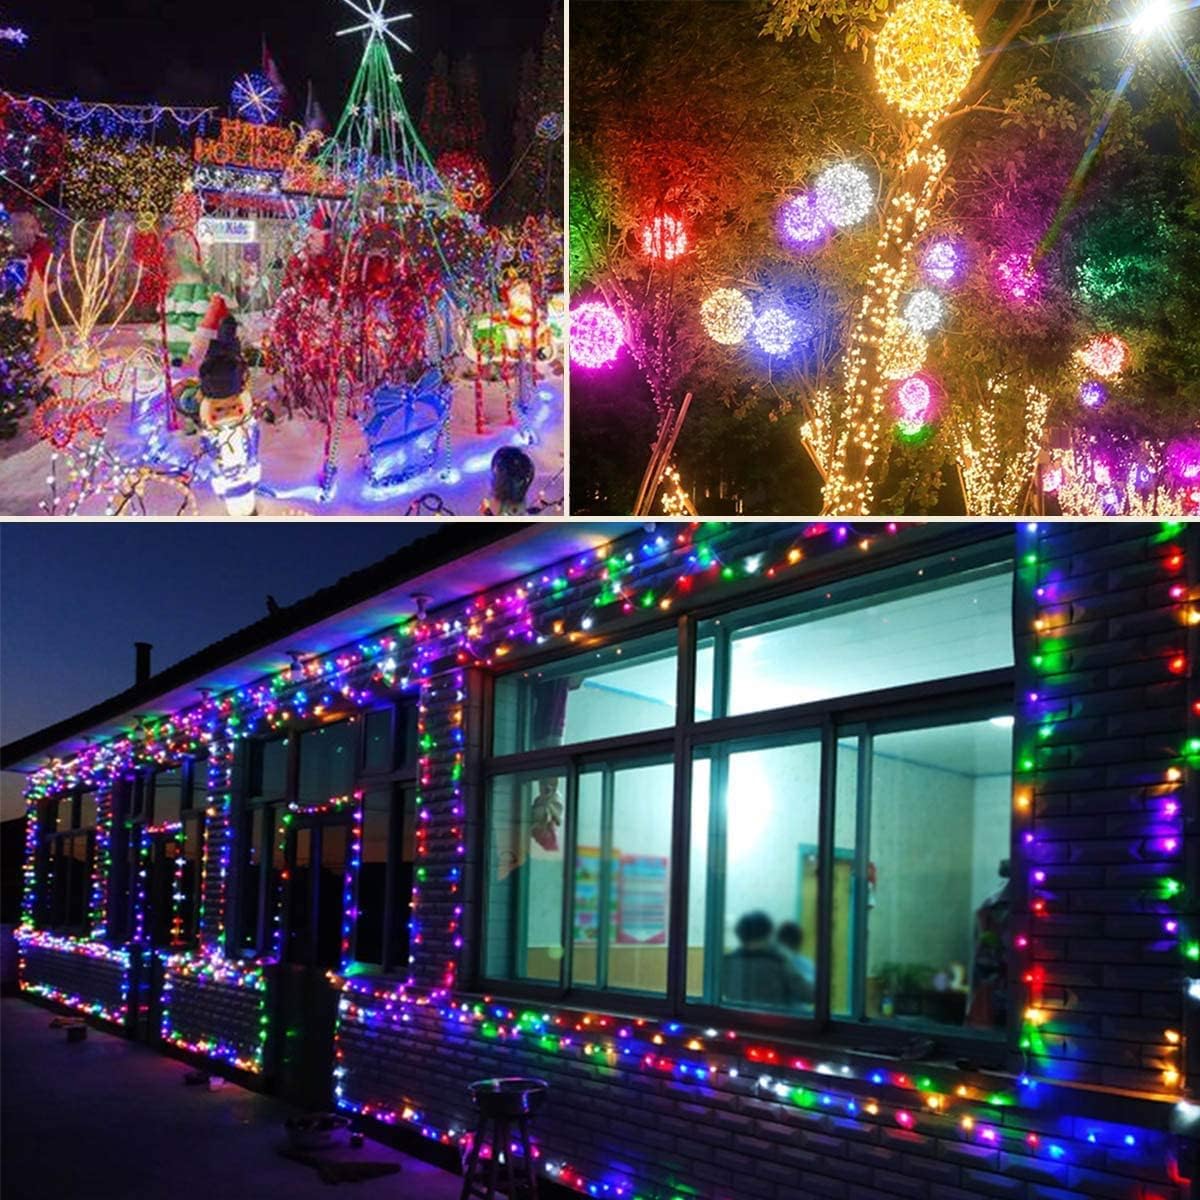 EYUVAA Premium 600 LED 100 Meter String Lights for Decoration, Waterproof Indoor Outdoor 8 Modes Fairy Lights for Patio Wall Party Wedding Diwali Decoration Lights (Multi-Color)